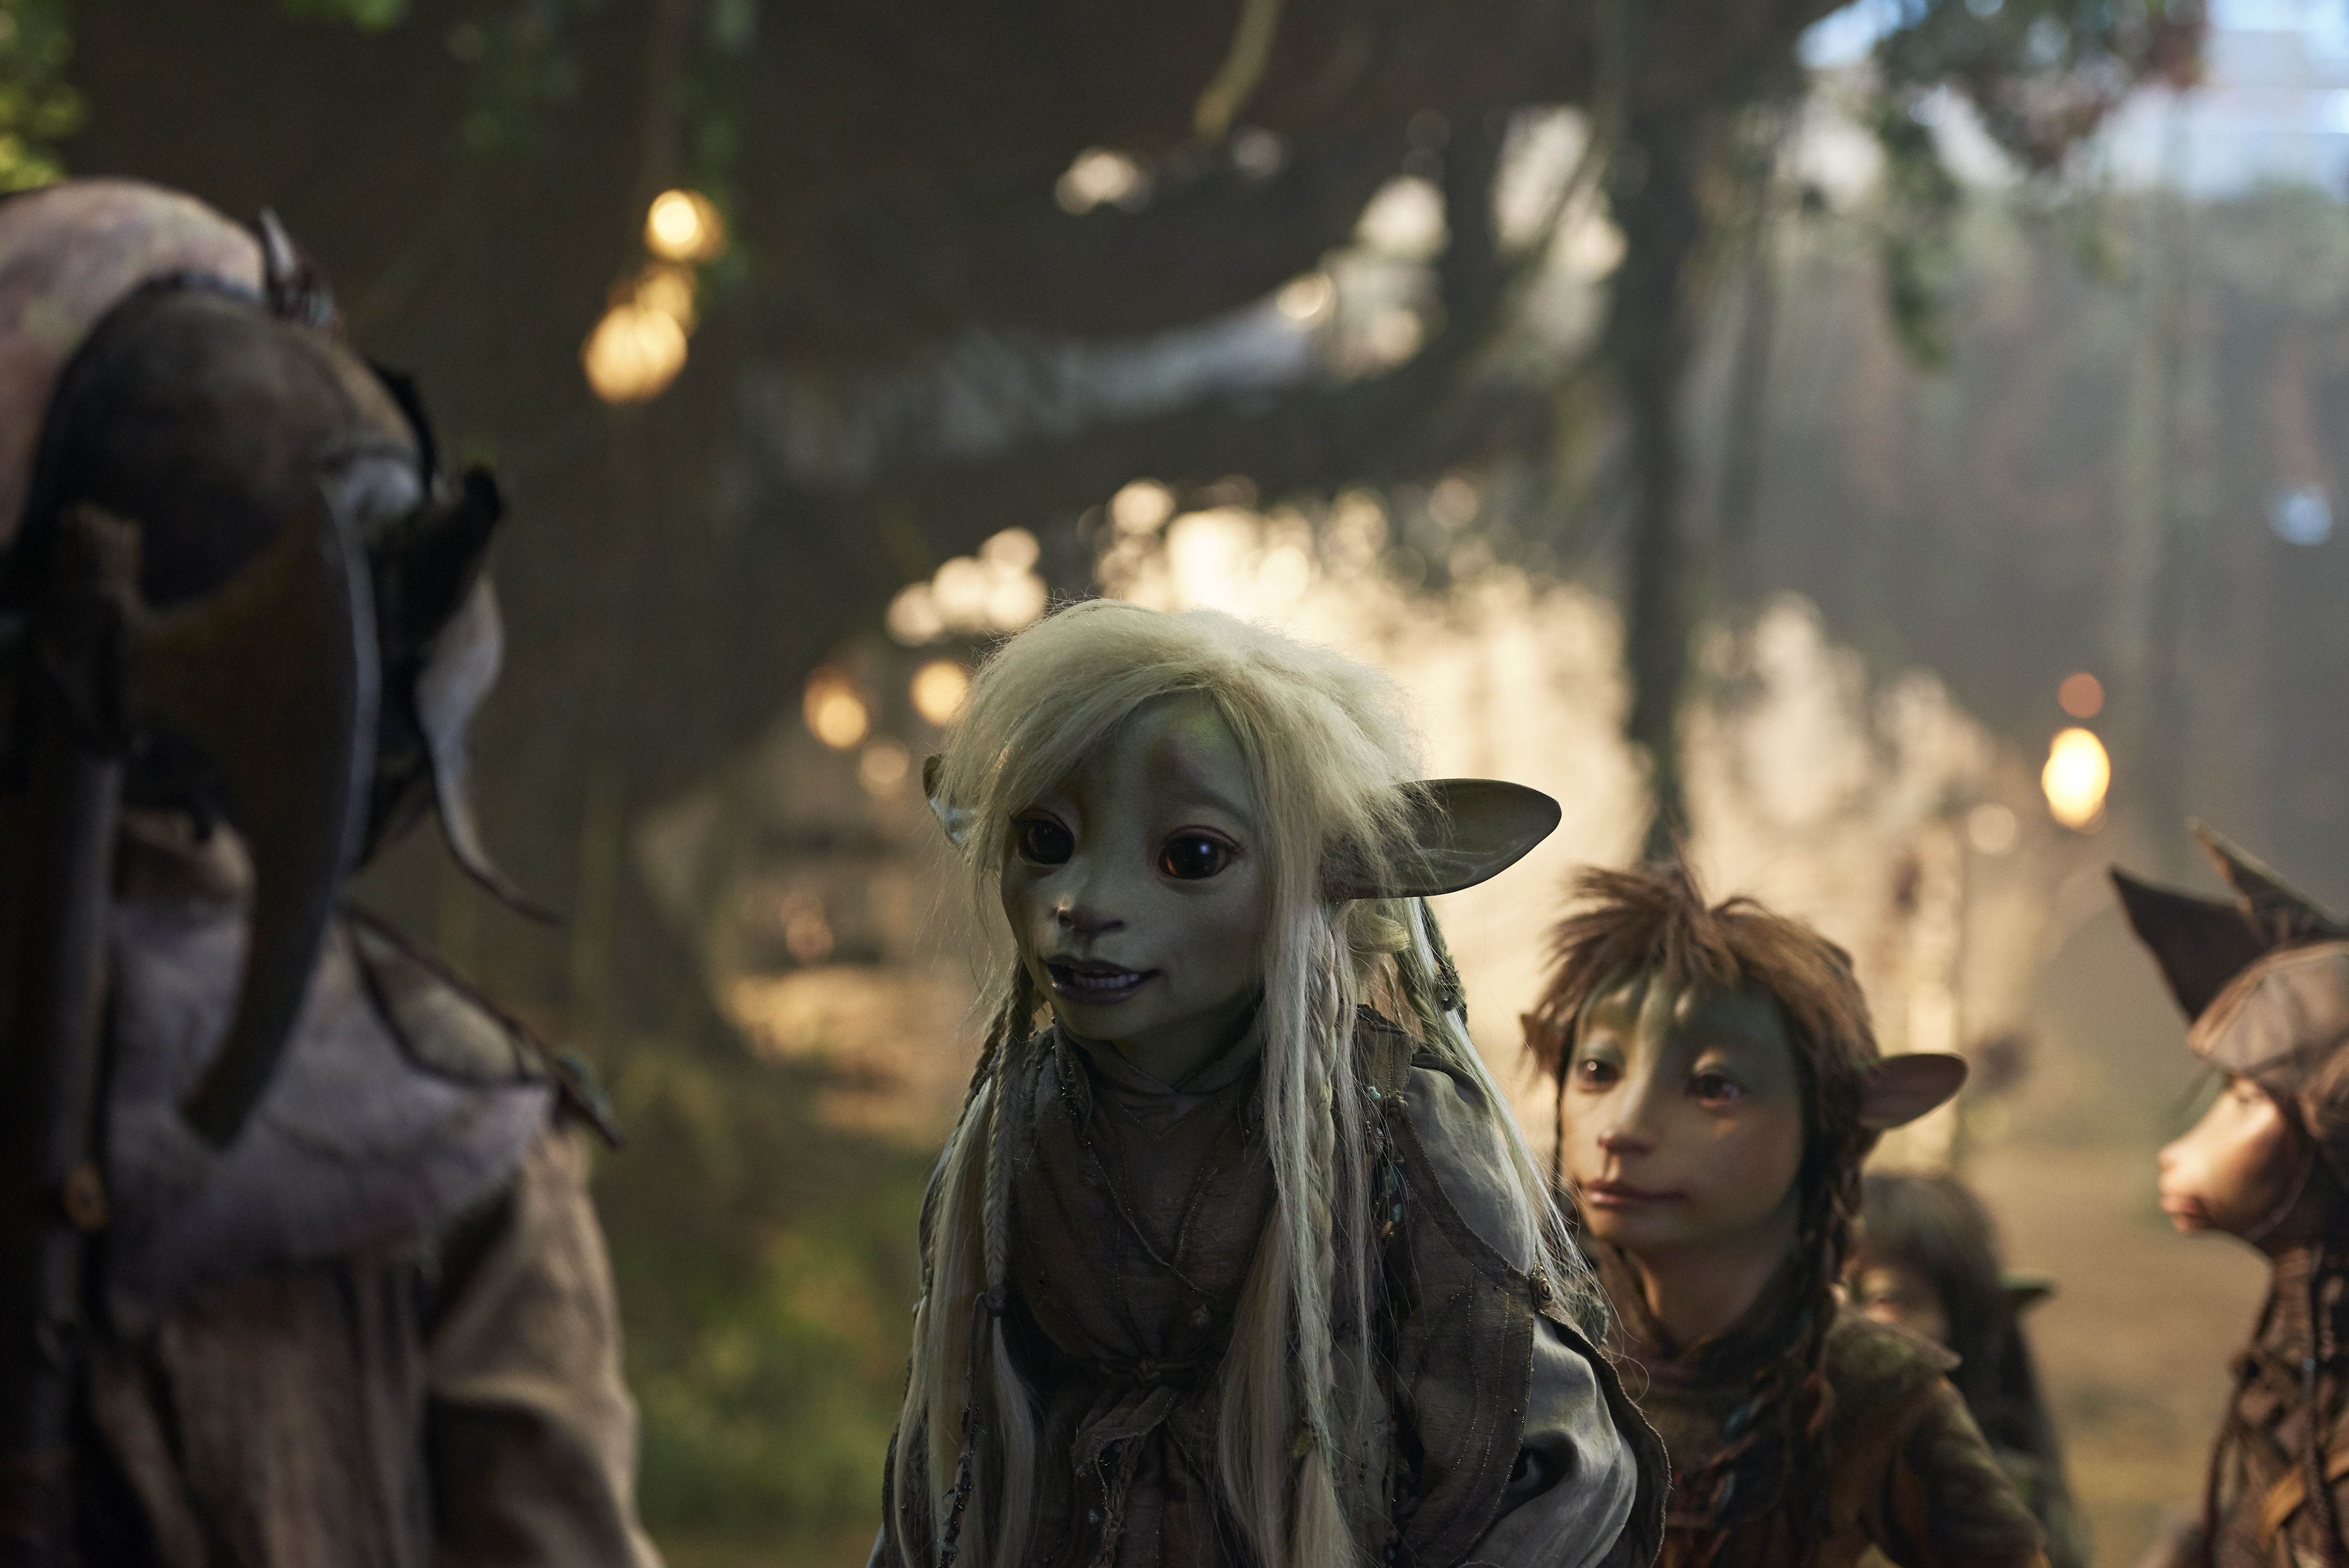 Deet (Center) in The Dark Crystal: Age of Resistance